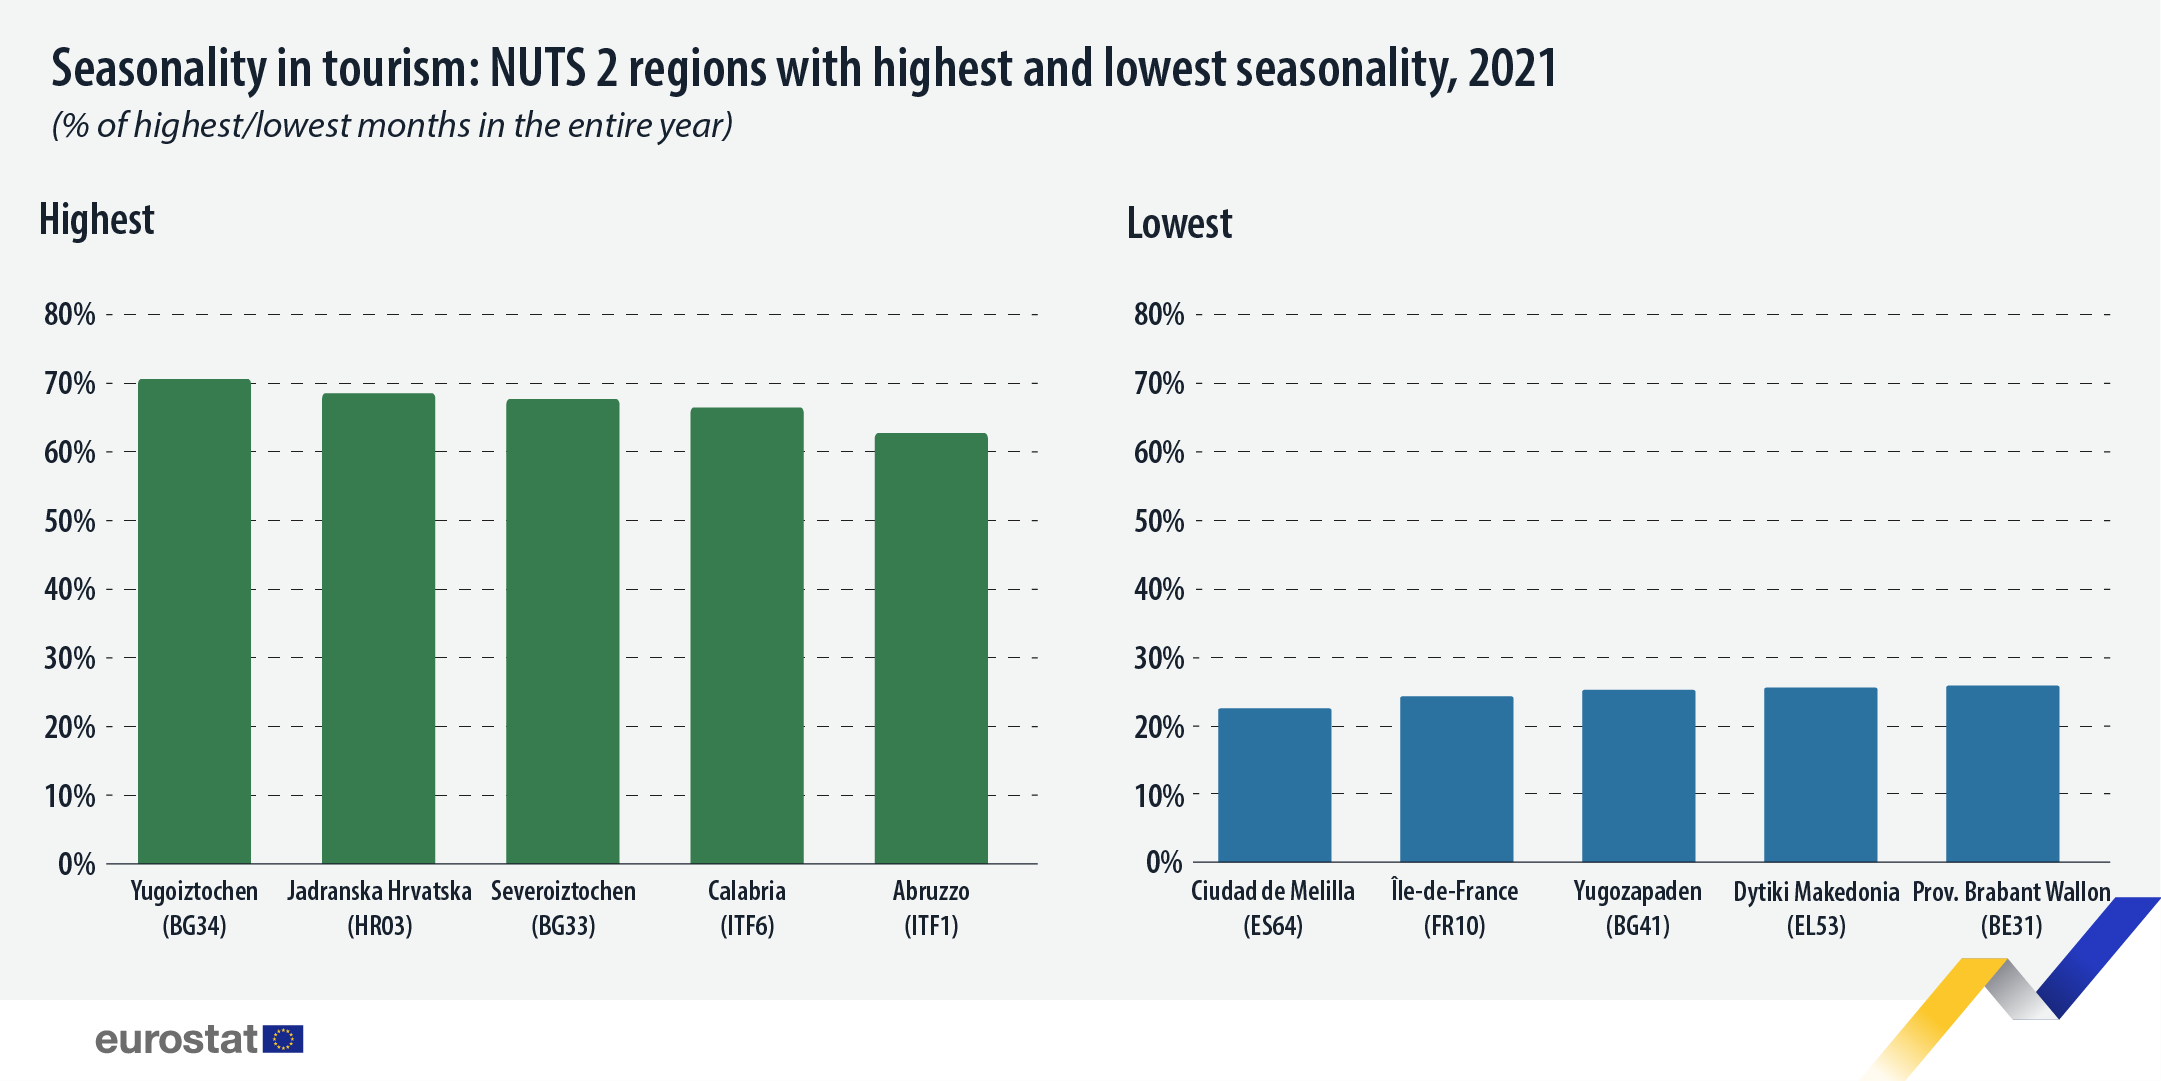 Bar chart: Seasonality in tourism: NUTS 2 regions with highest and lowest seasonality, % of highest/lowest months in the entire year, 2021